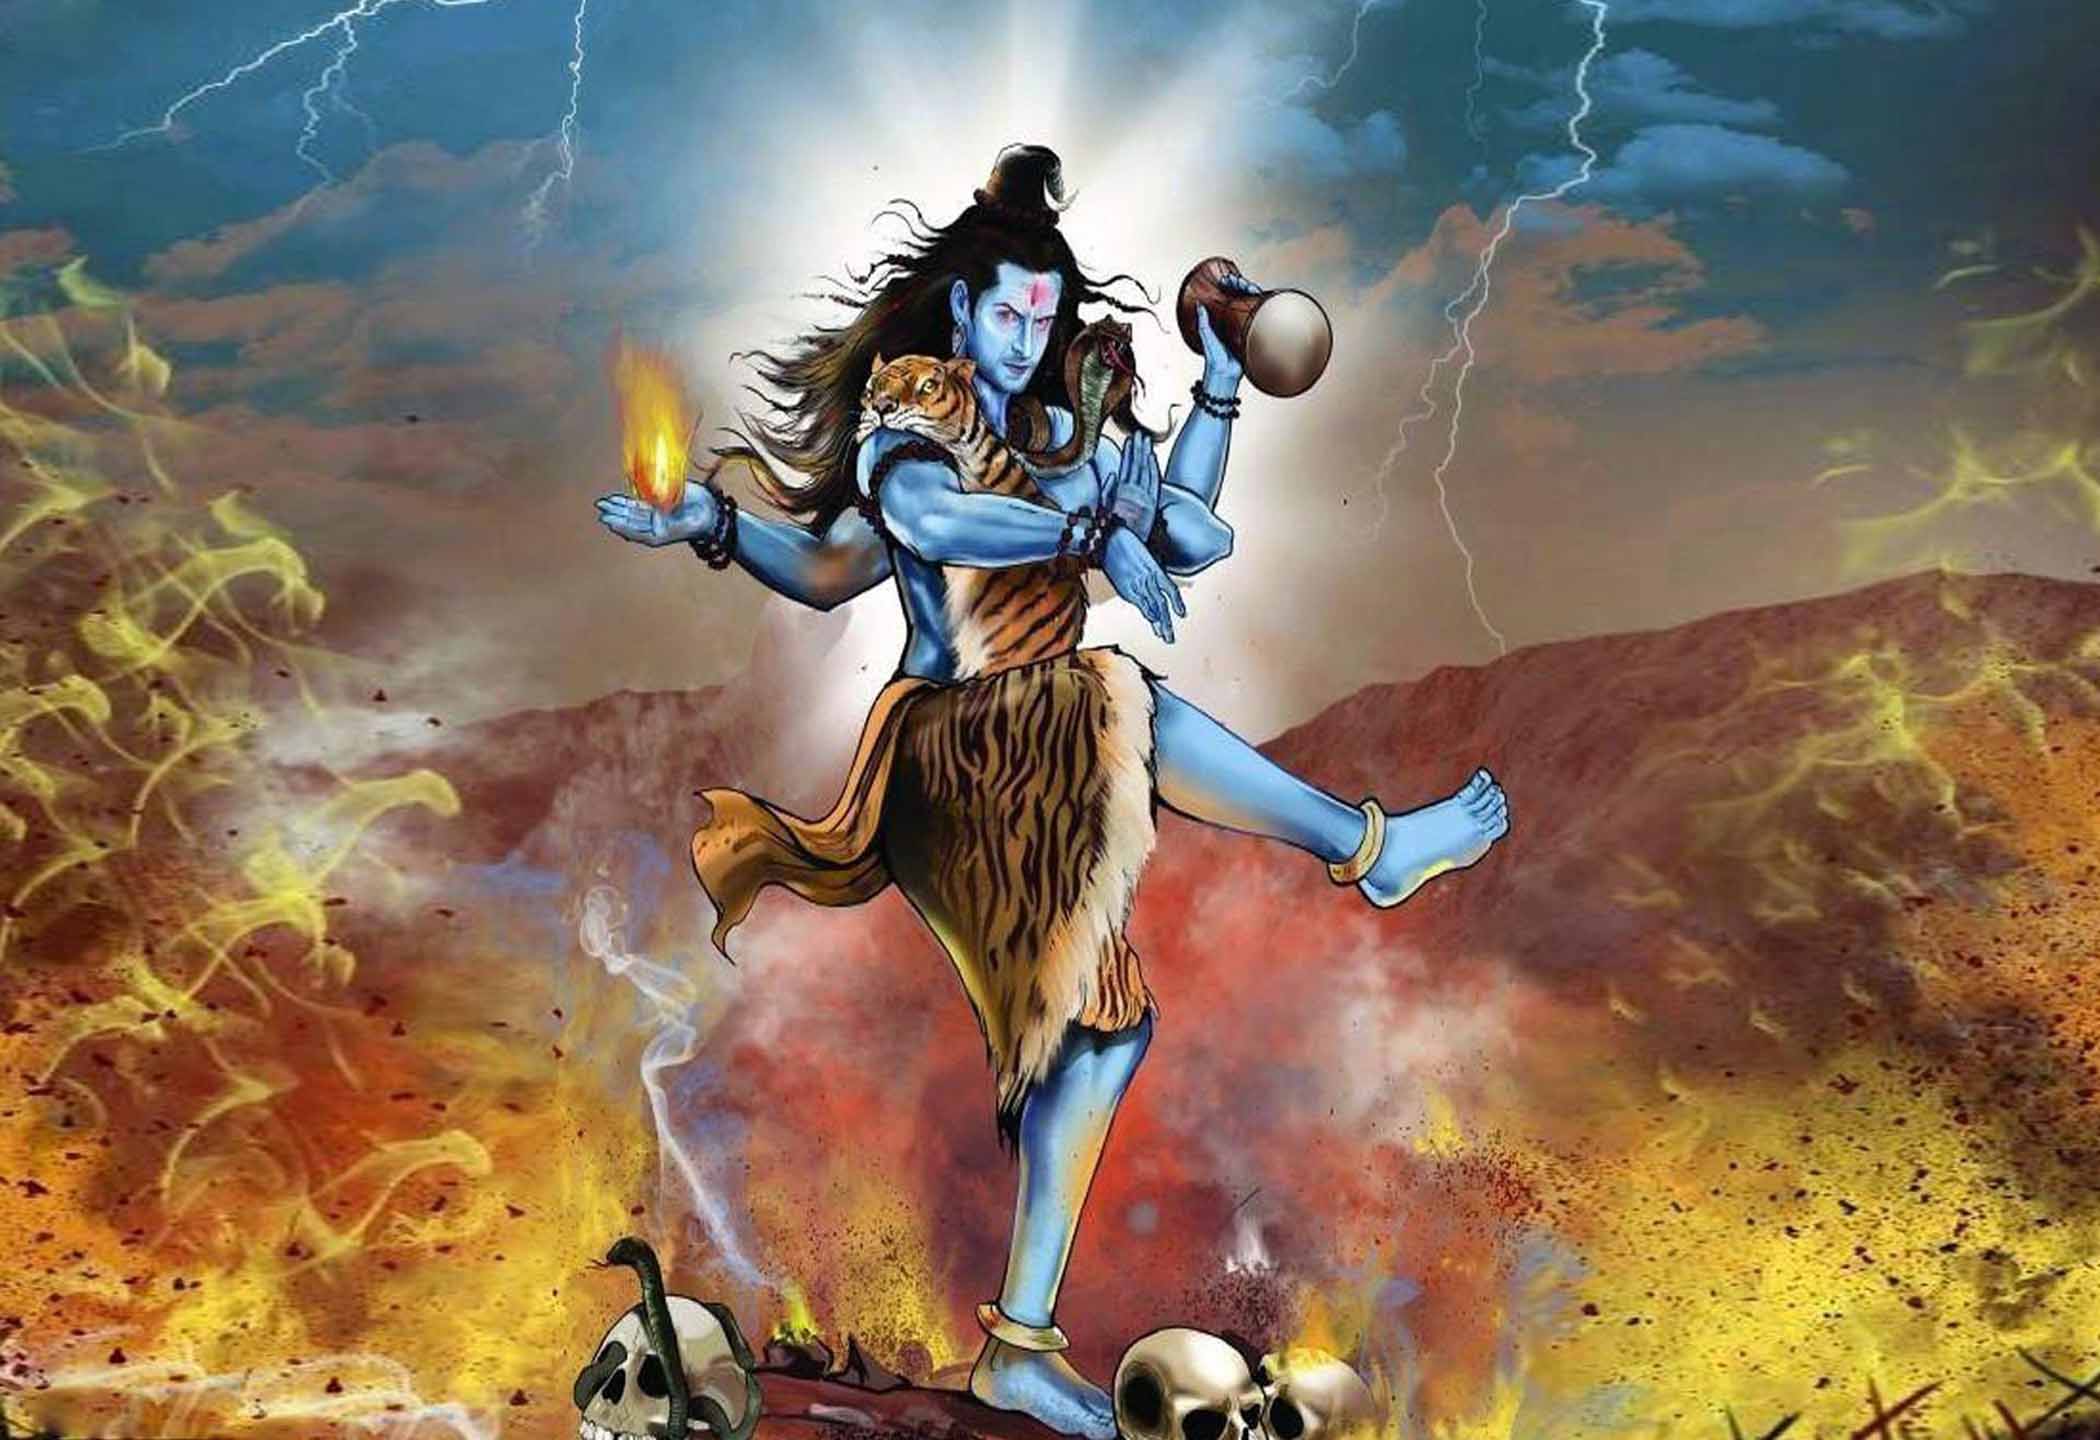 Animated Lord Shiva Images Hd P Carrotapp